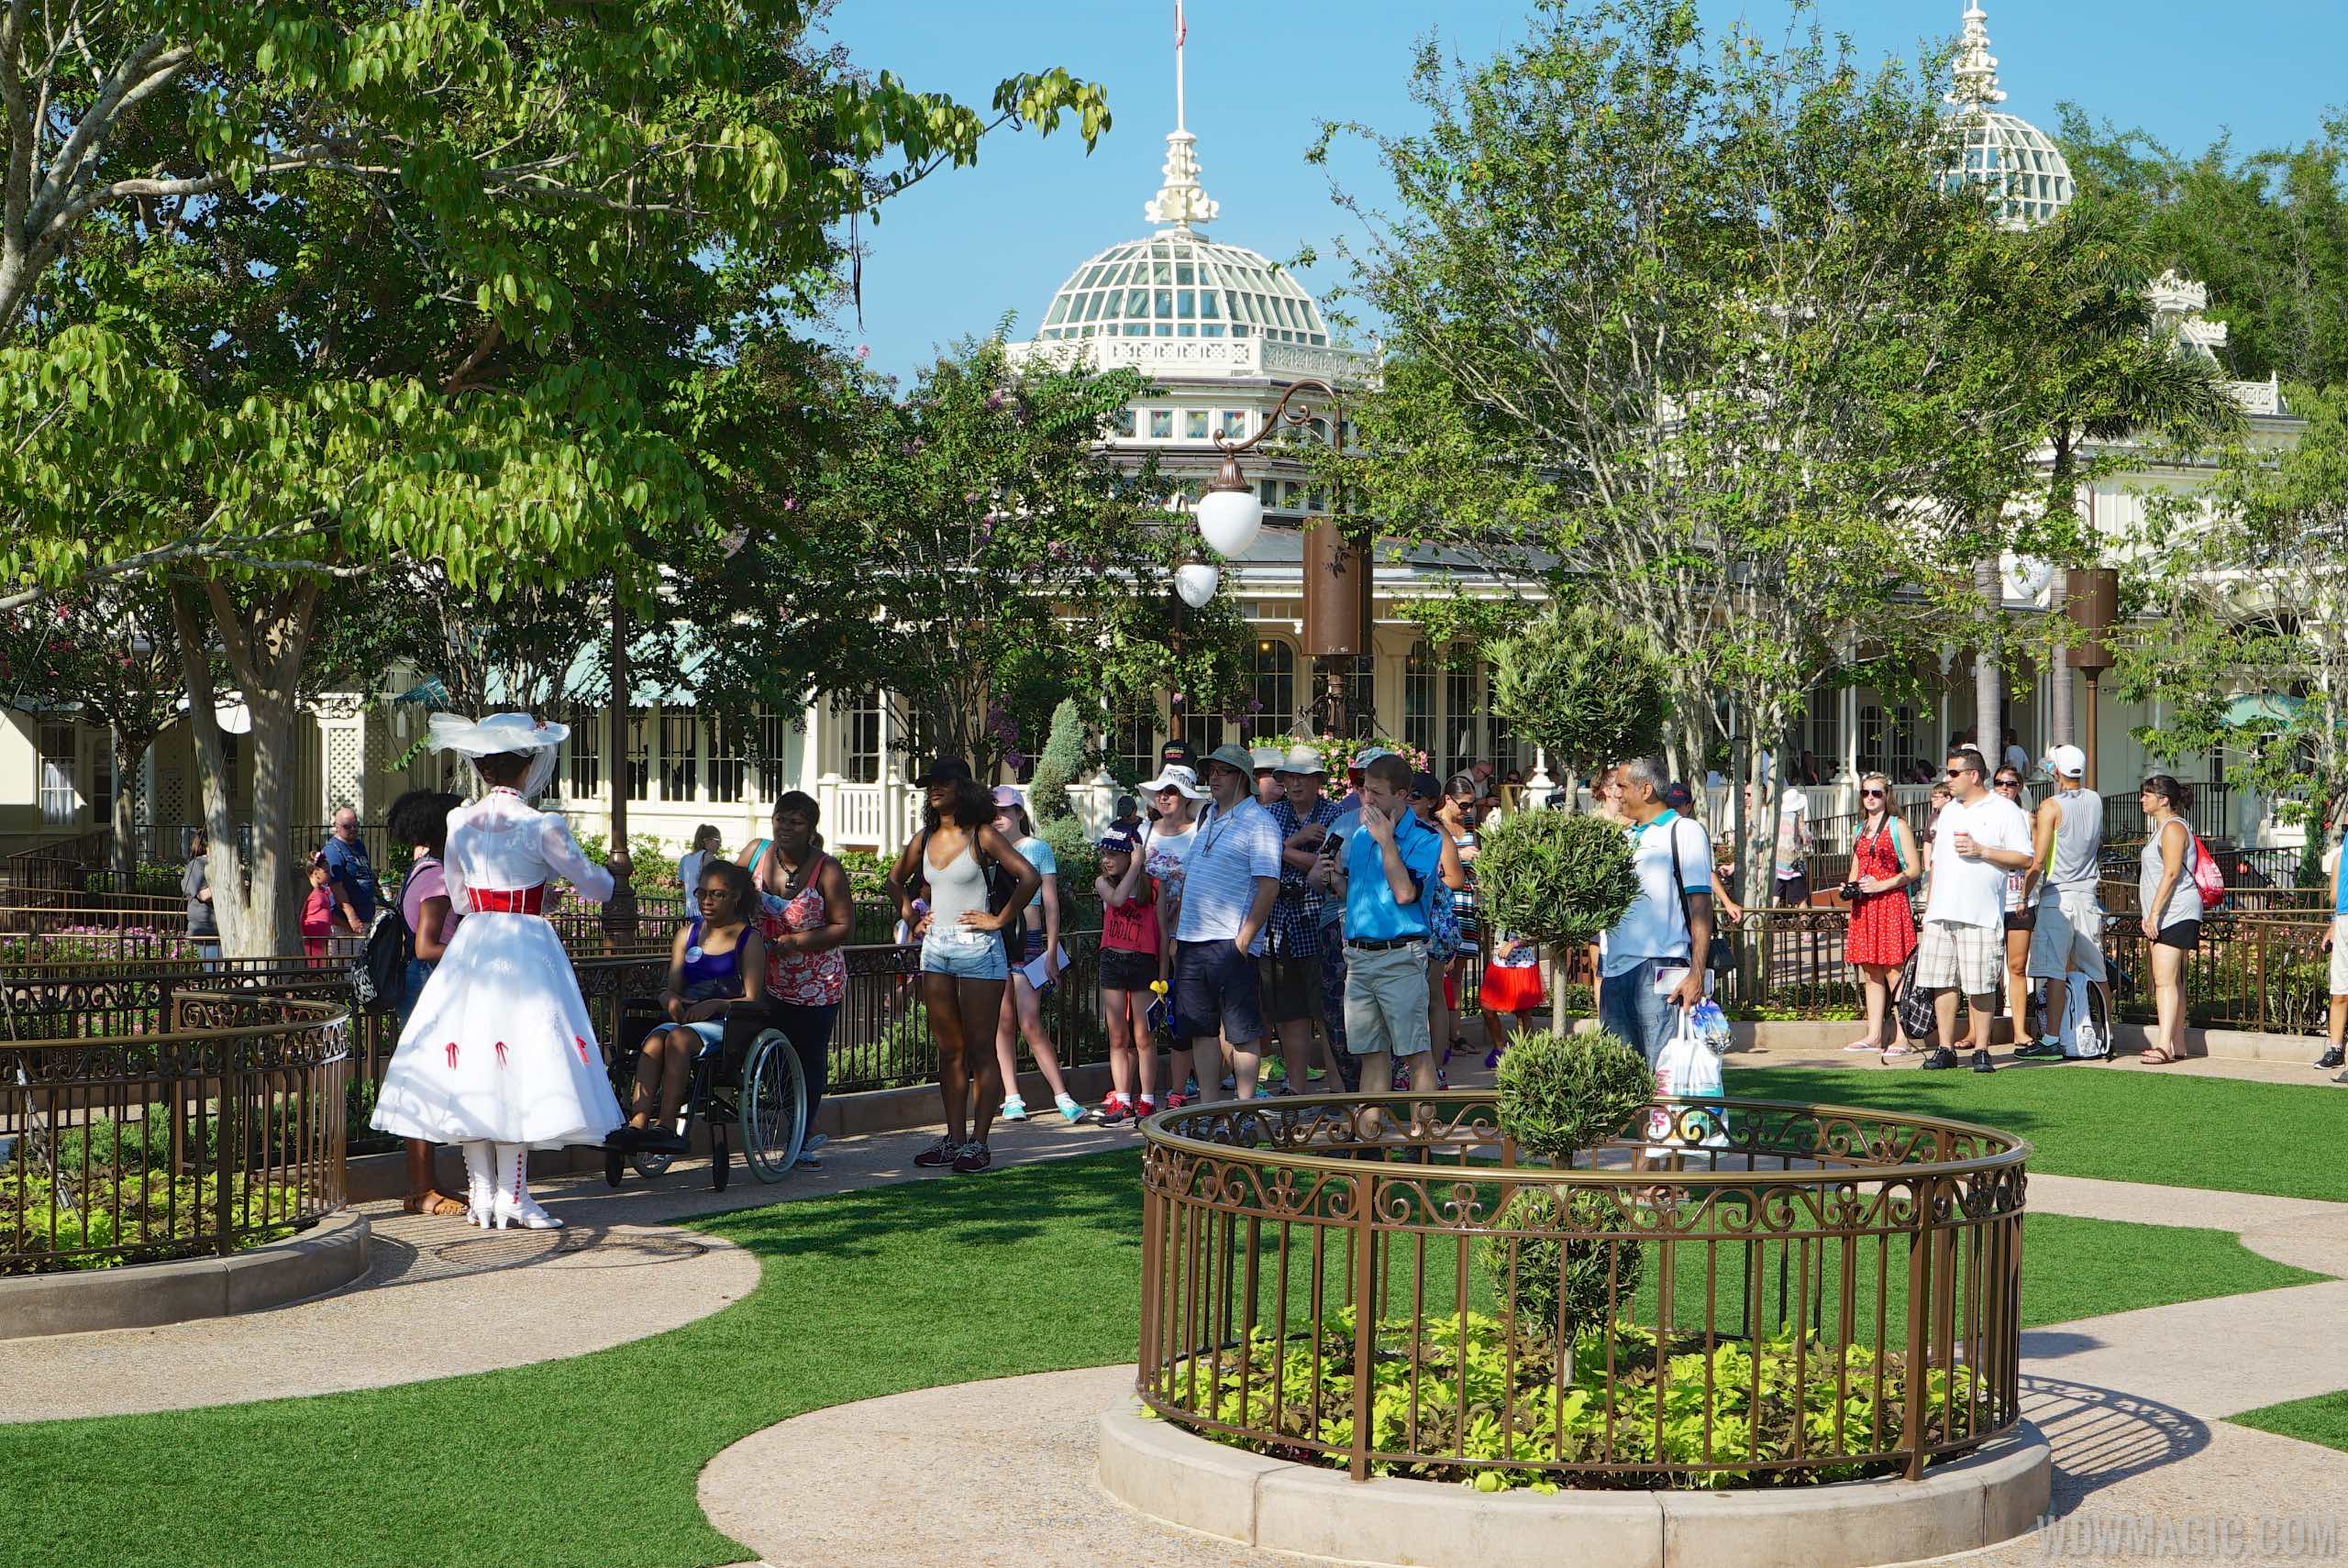 Mary Poppins Plaza Gardens West Meet And Greet Photo 3 Of 3